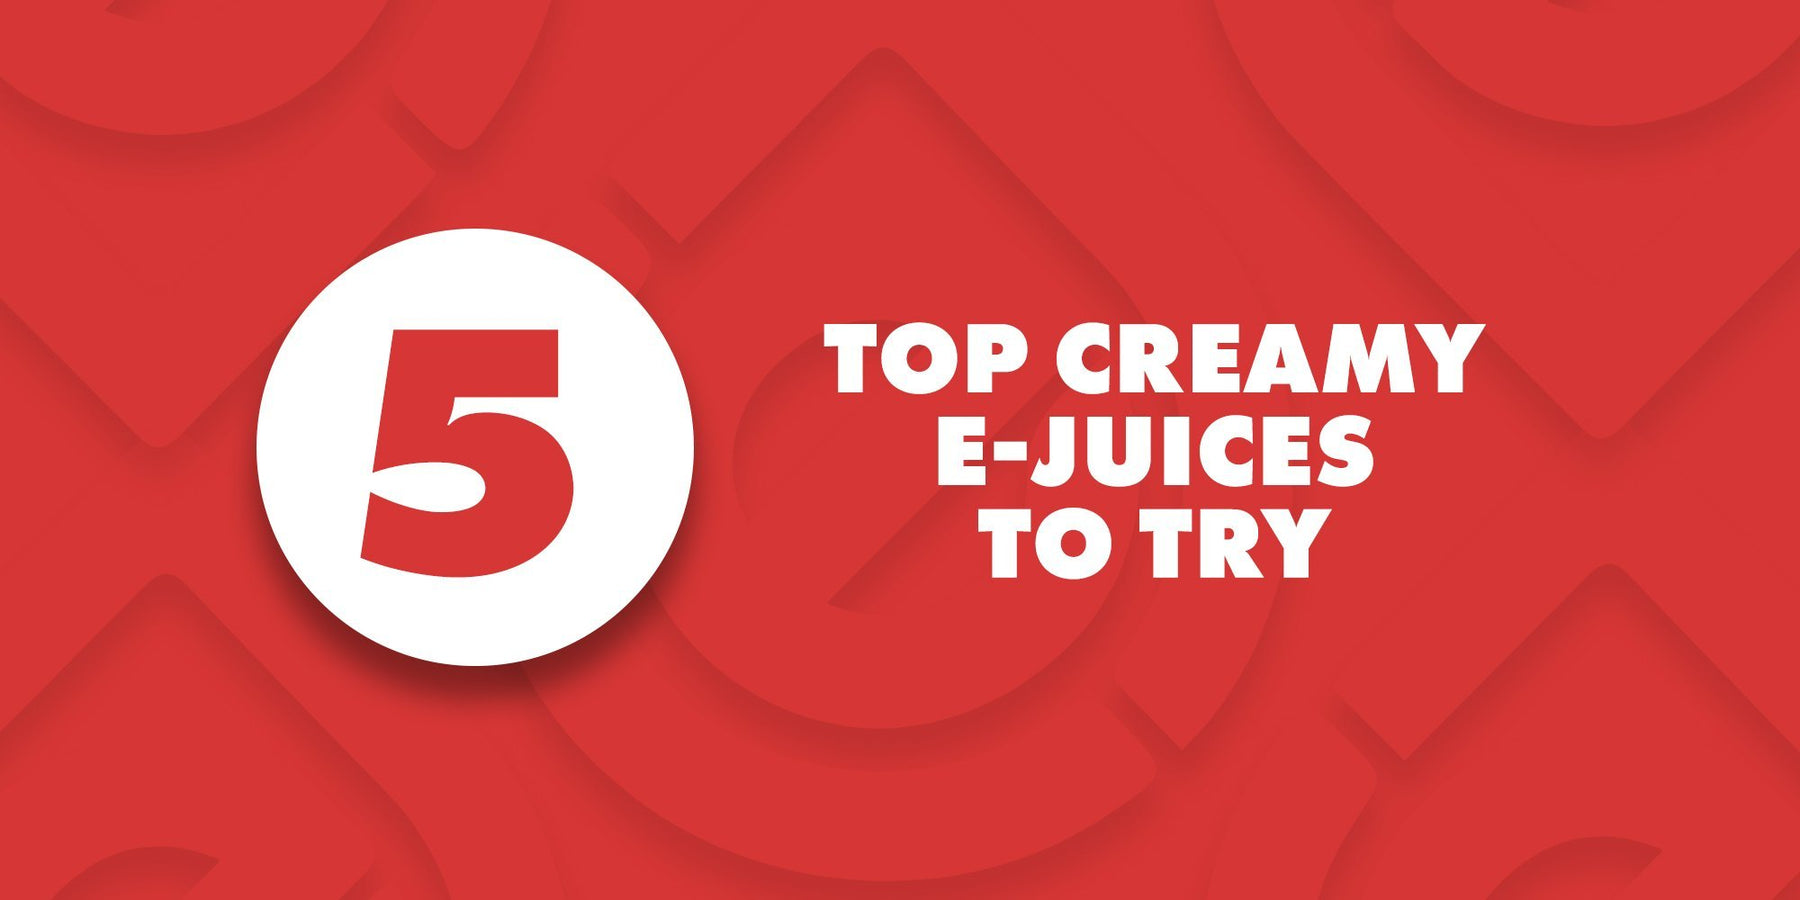 5 Top Creamy E-Juices to Try | Cheap eJuice